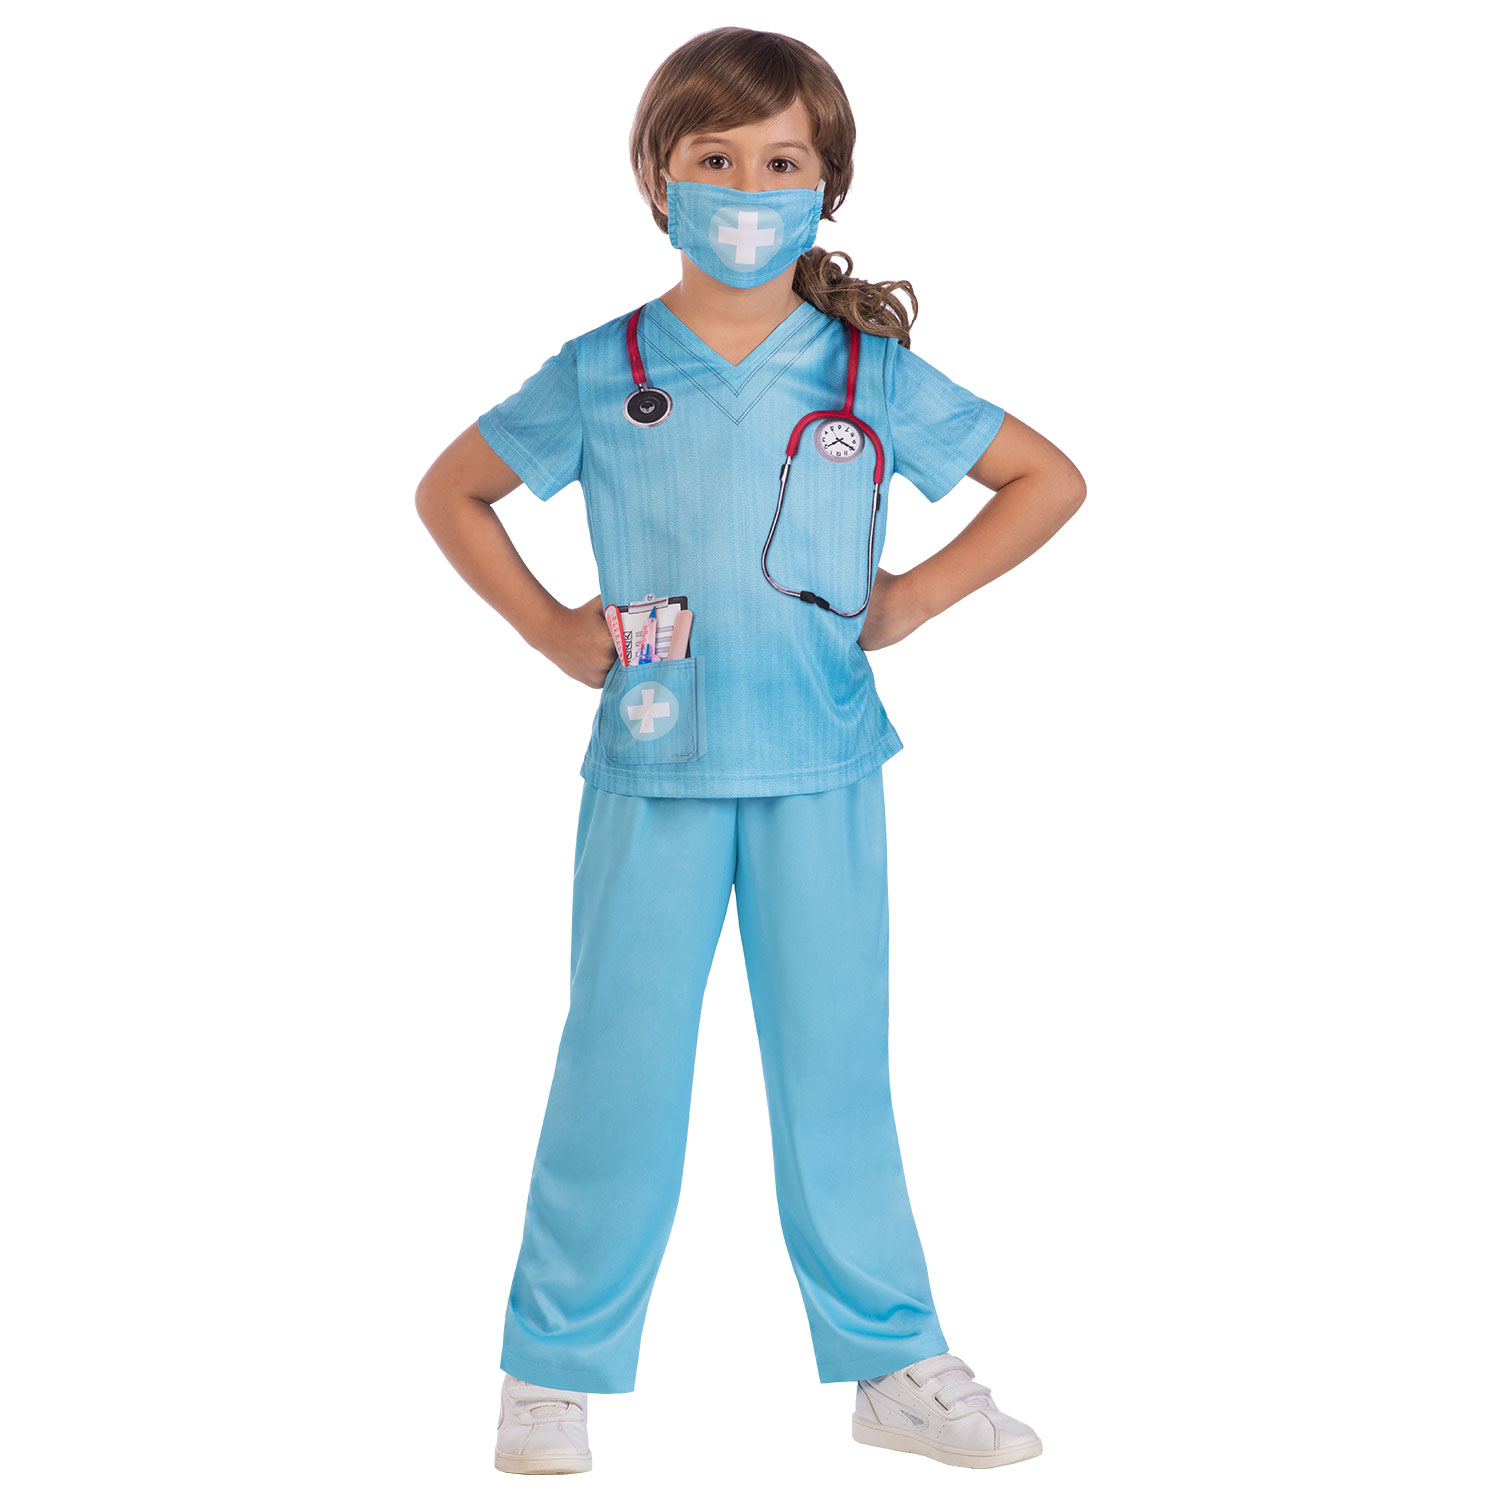 Doctor Sustainable Costume - Age 8-10 Years - 1 PC : Amscan International